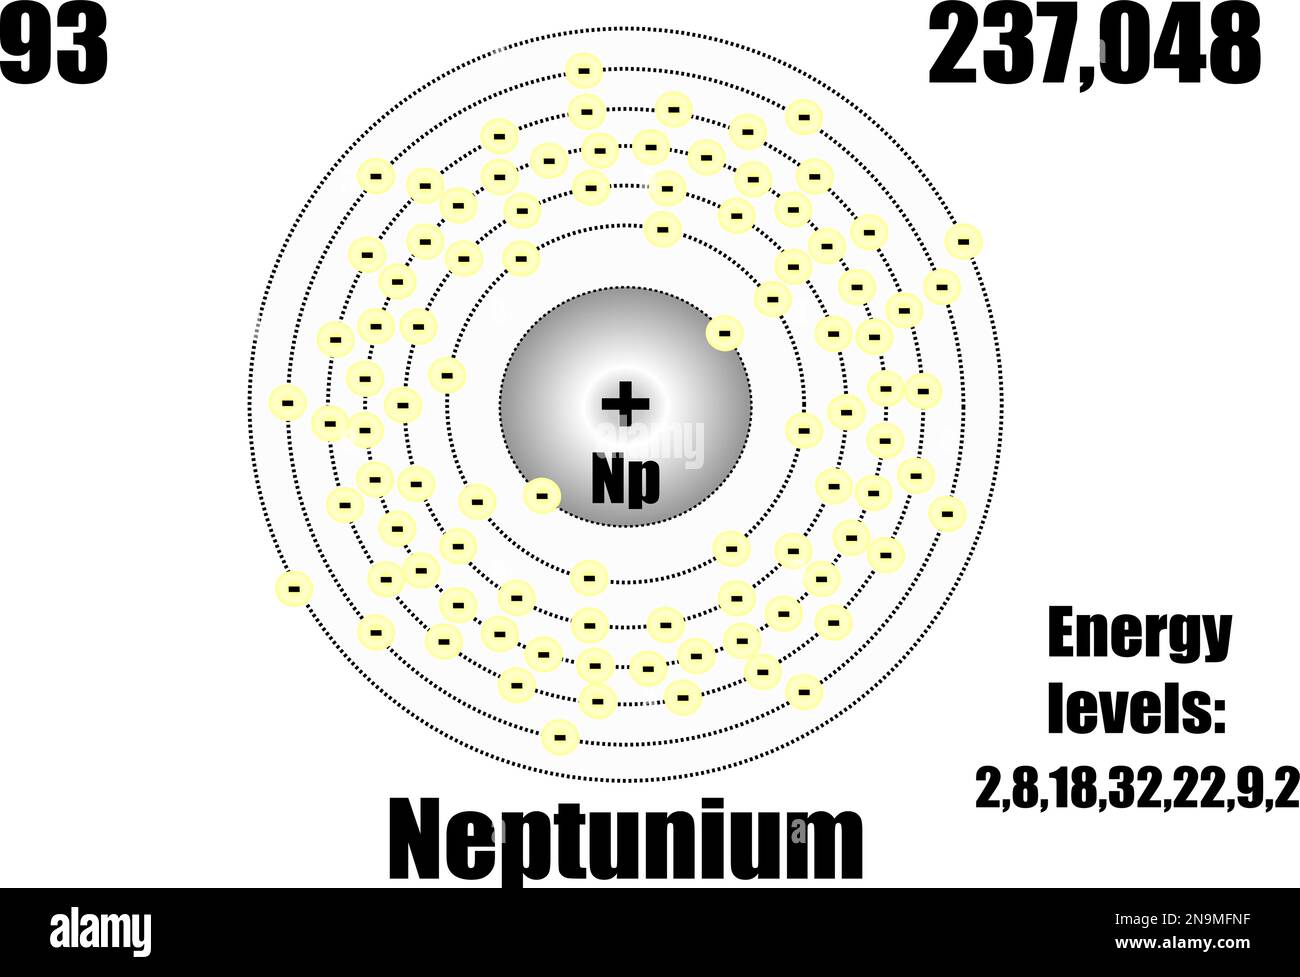 Neptunium atom, with mass and energy levels. Vector illustration Stock Vector